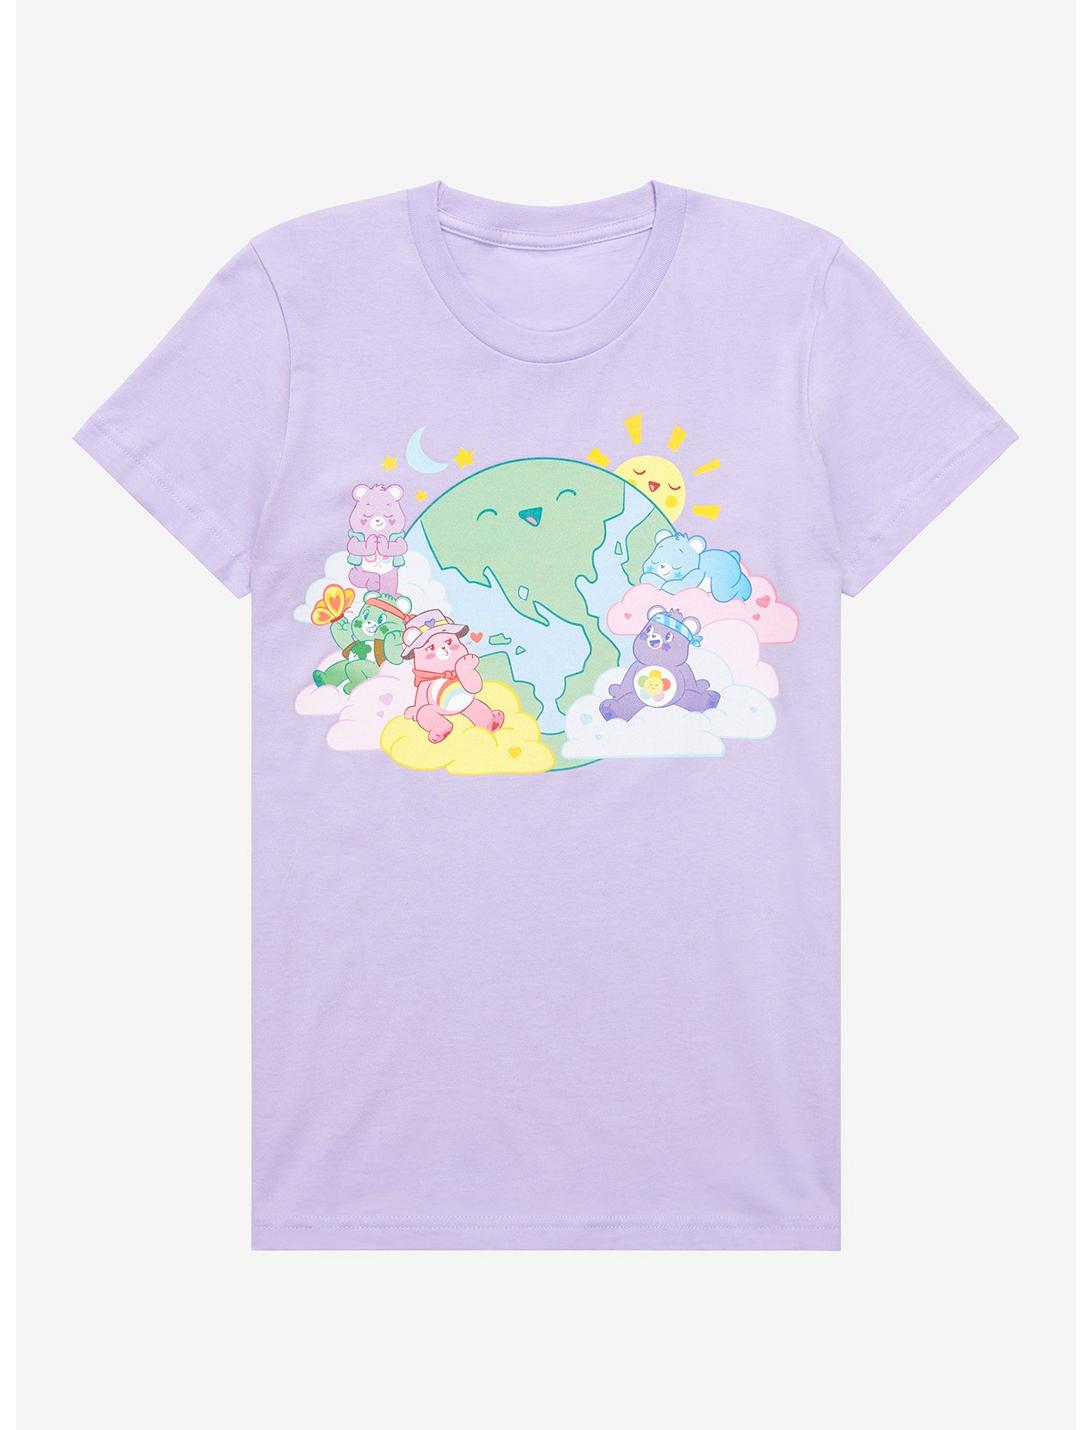 Care Bears Smiling Earth Women's T-Shirt - BoxLunch Exclusive, LIGHT PURPLE, hi-res